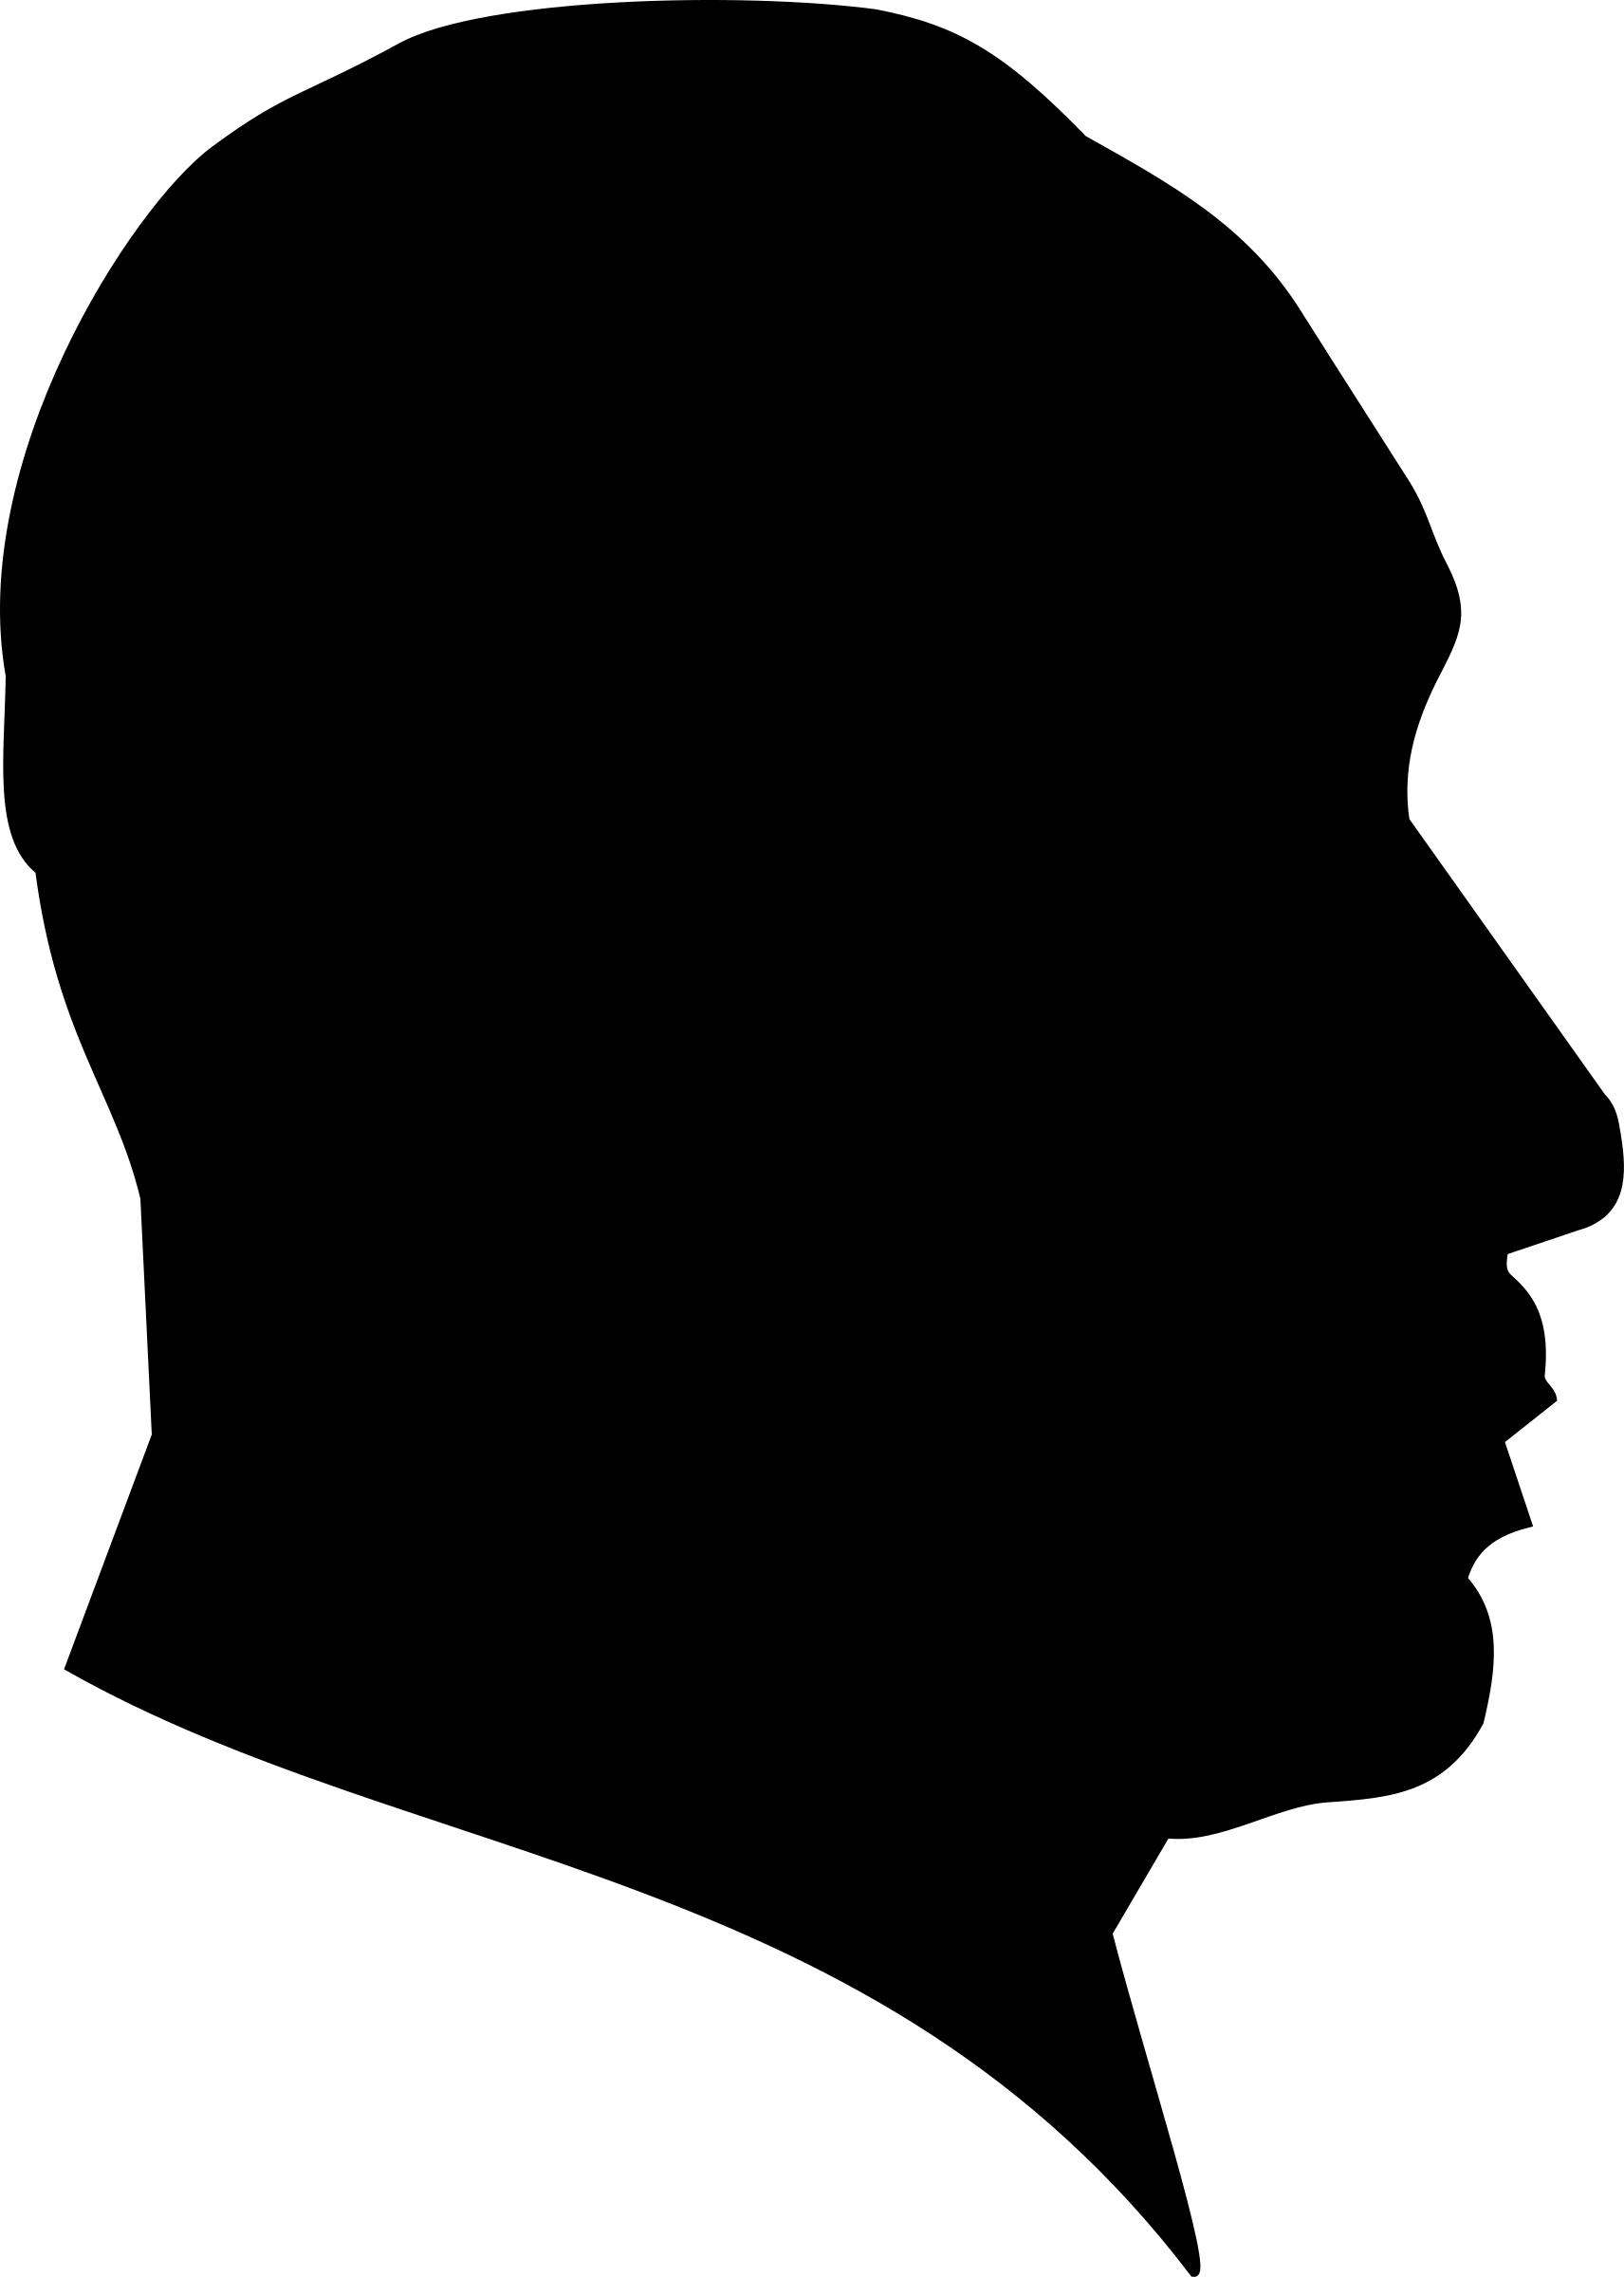 Dr. Martin Luther King Profile Silhouette png